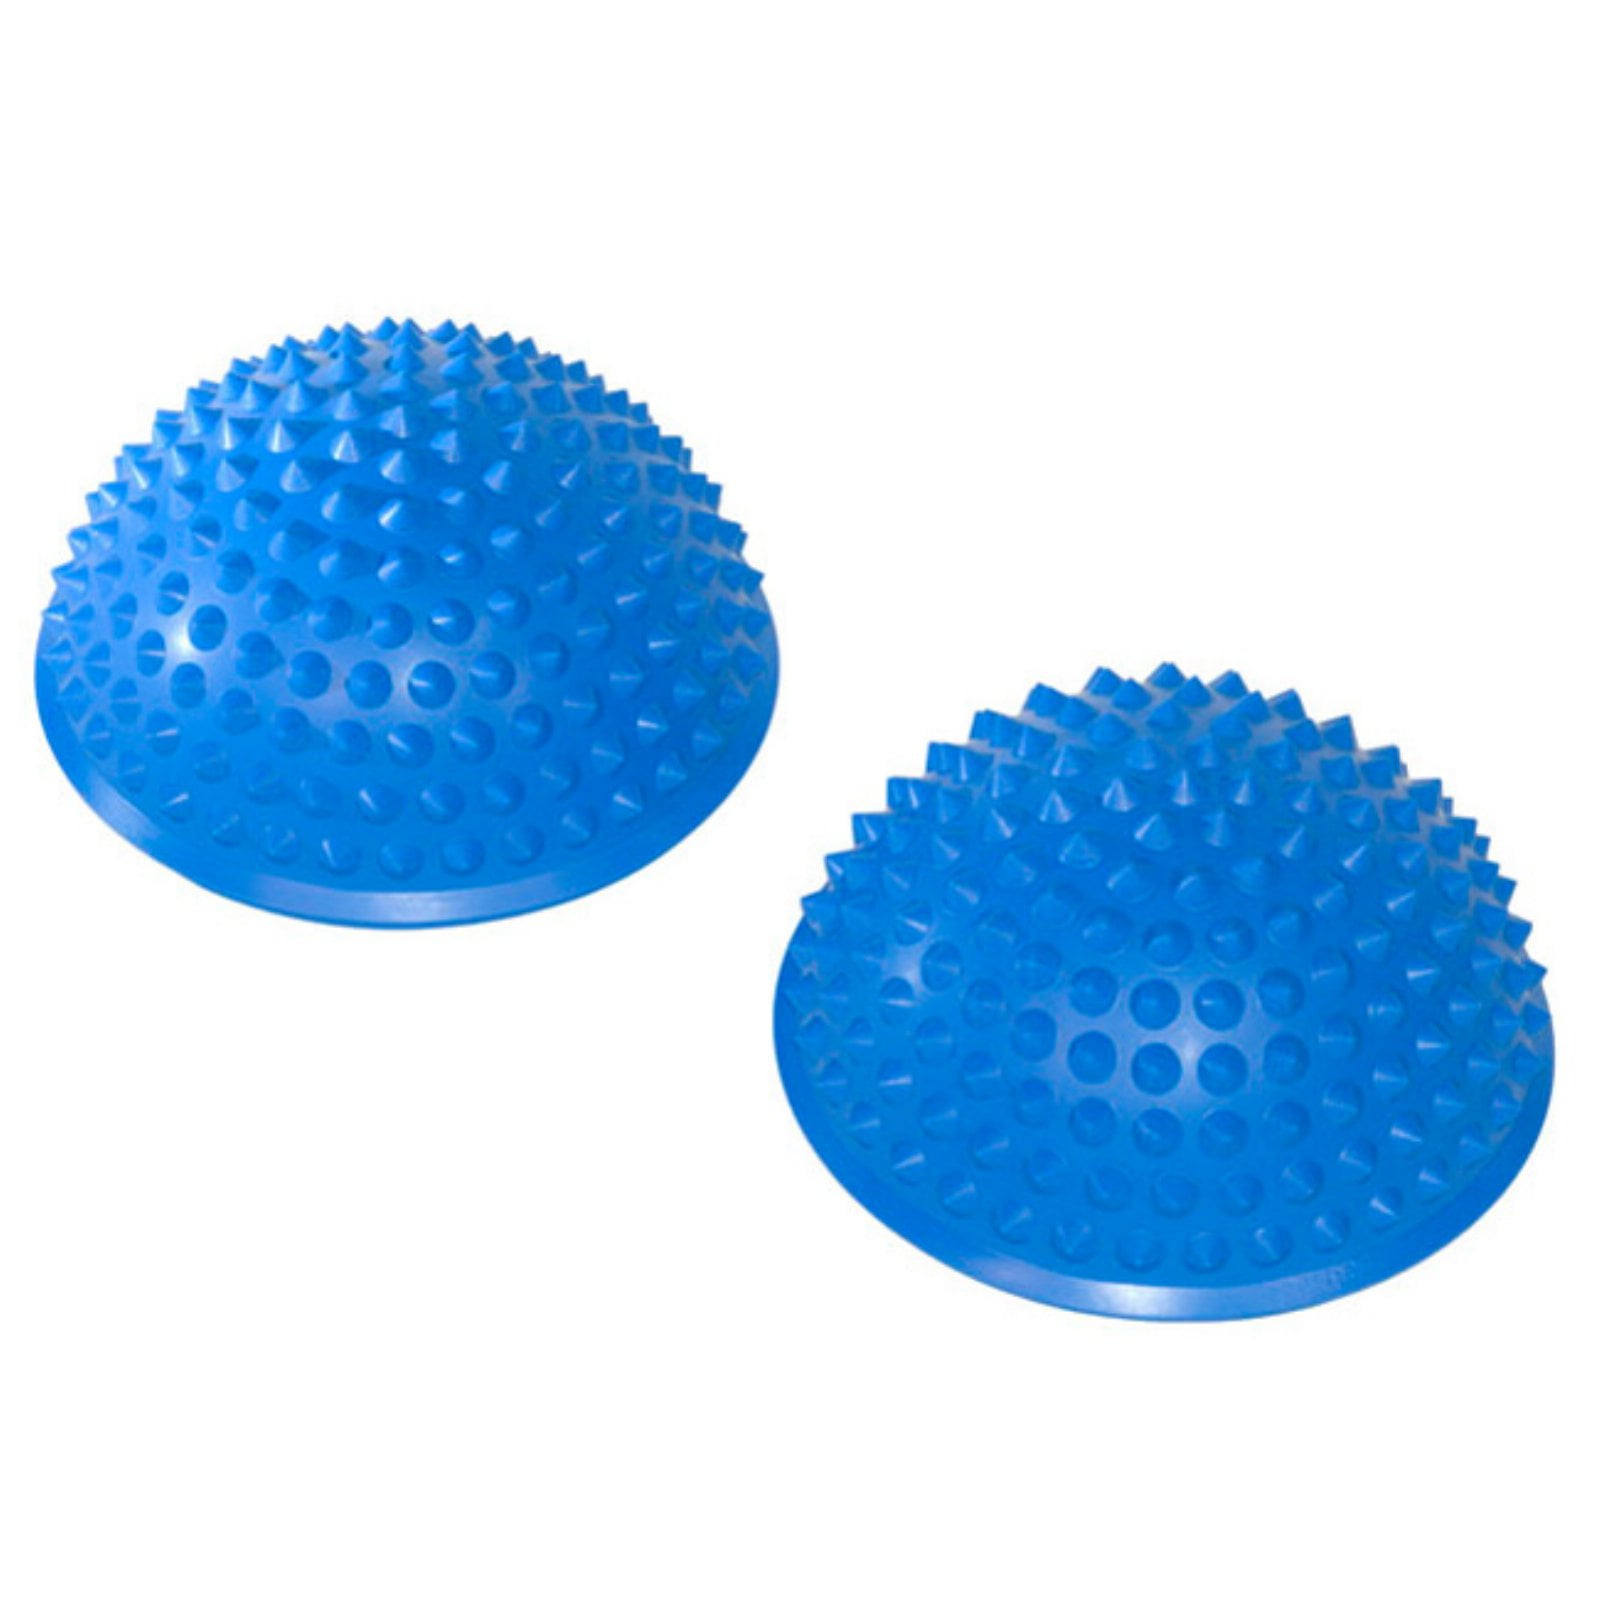 Soft Safe Children's Physical Training Toy 1Pcs Color : Yellow, Size : 3PCS Balance Stepping Stones for Kids Balance Pods- Hedgehog Style Half Dome Stepping Stones